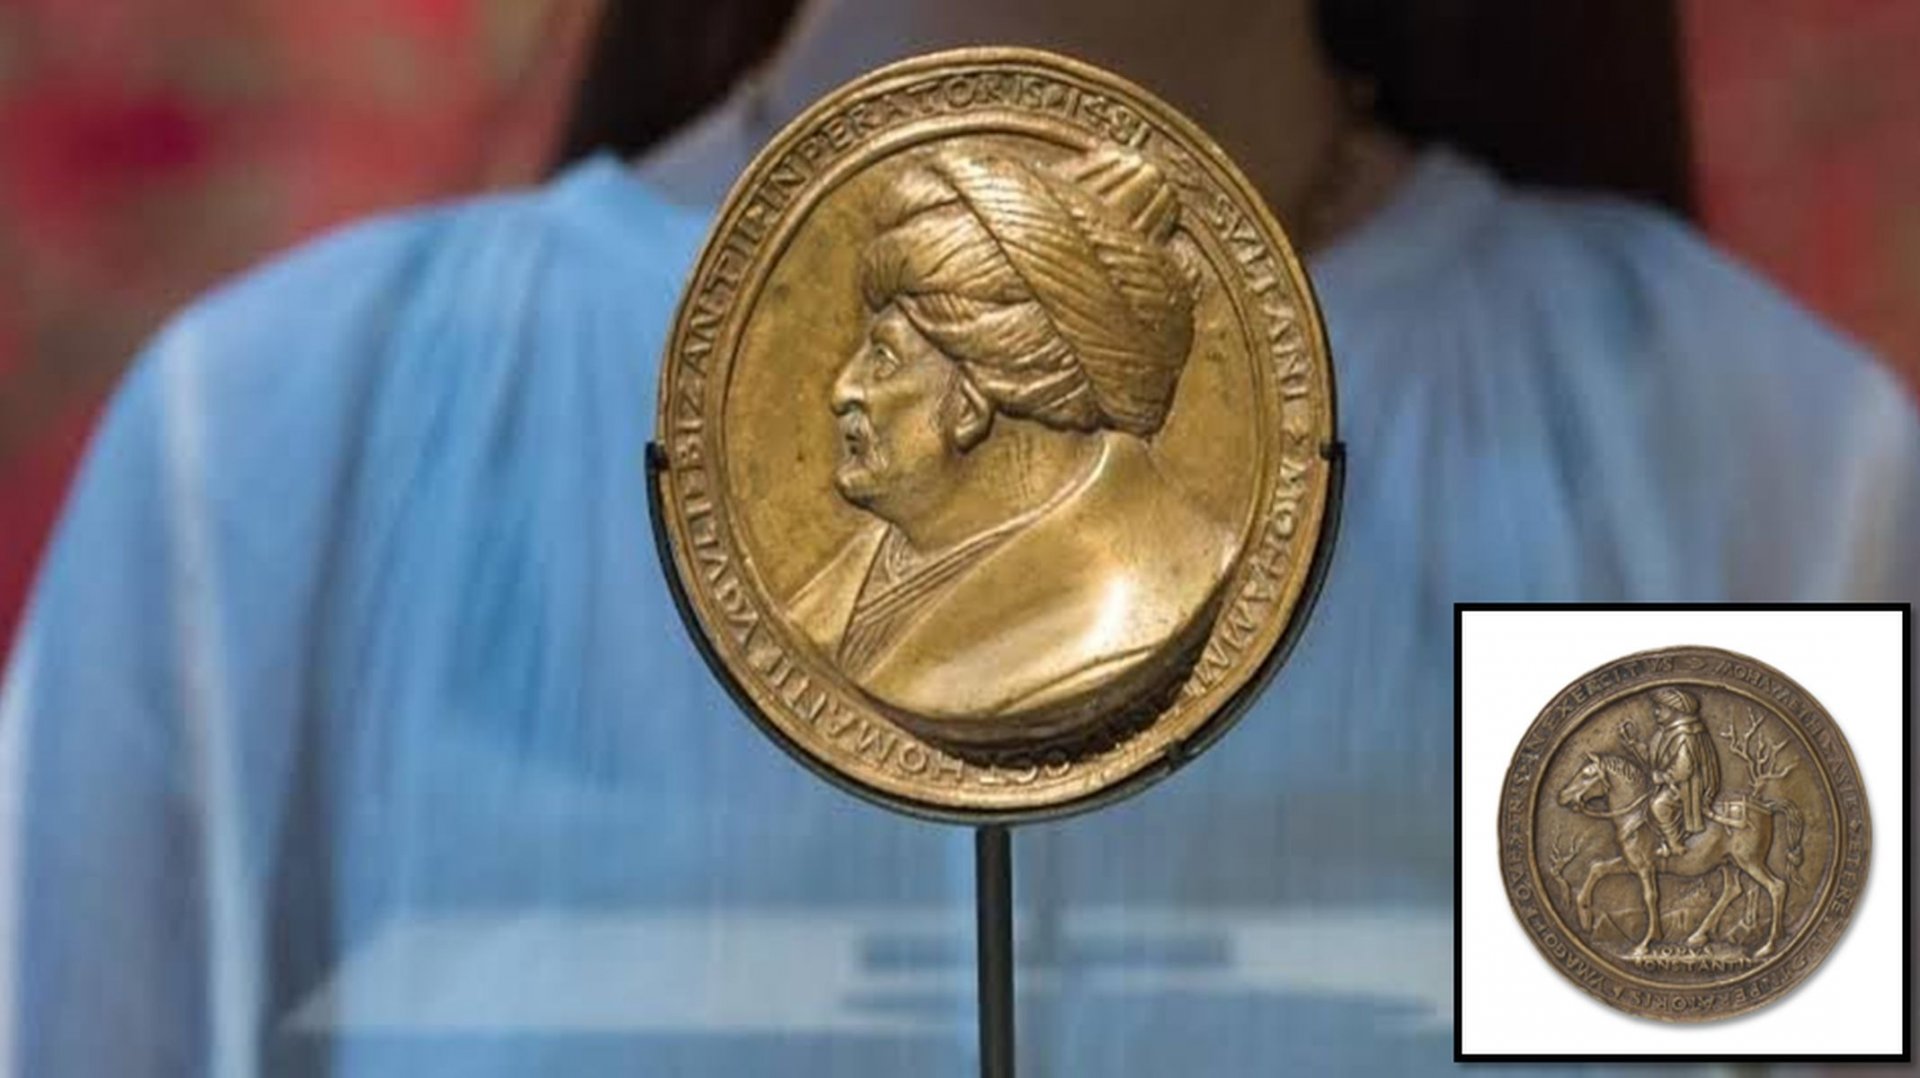 Medallion with Sultan Mehmet II’s portrait returning to country